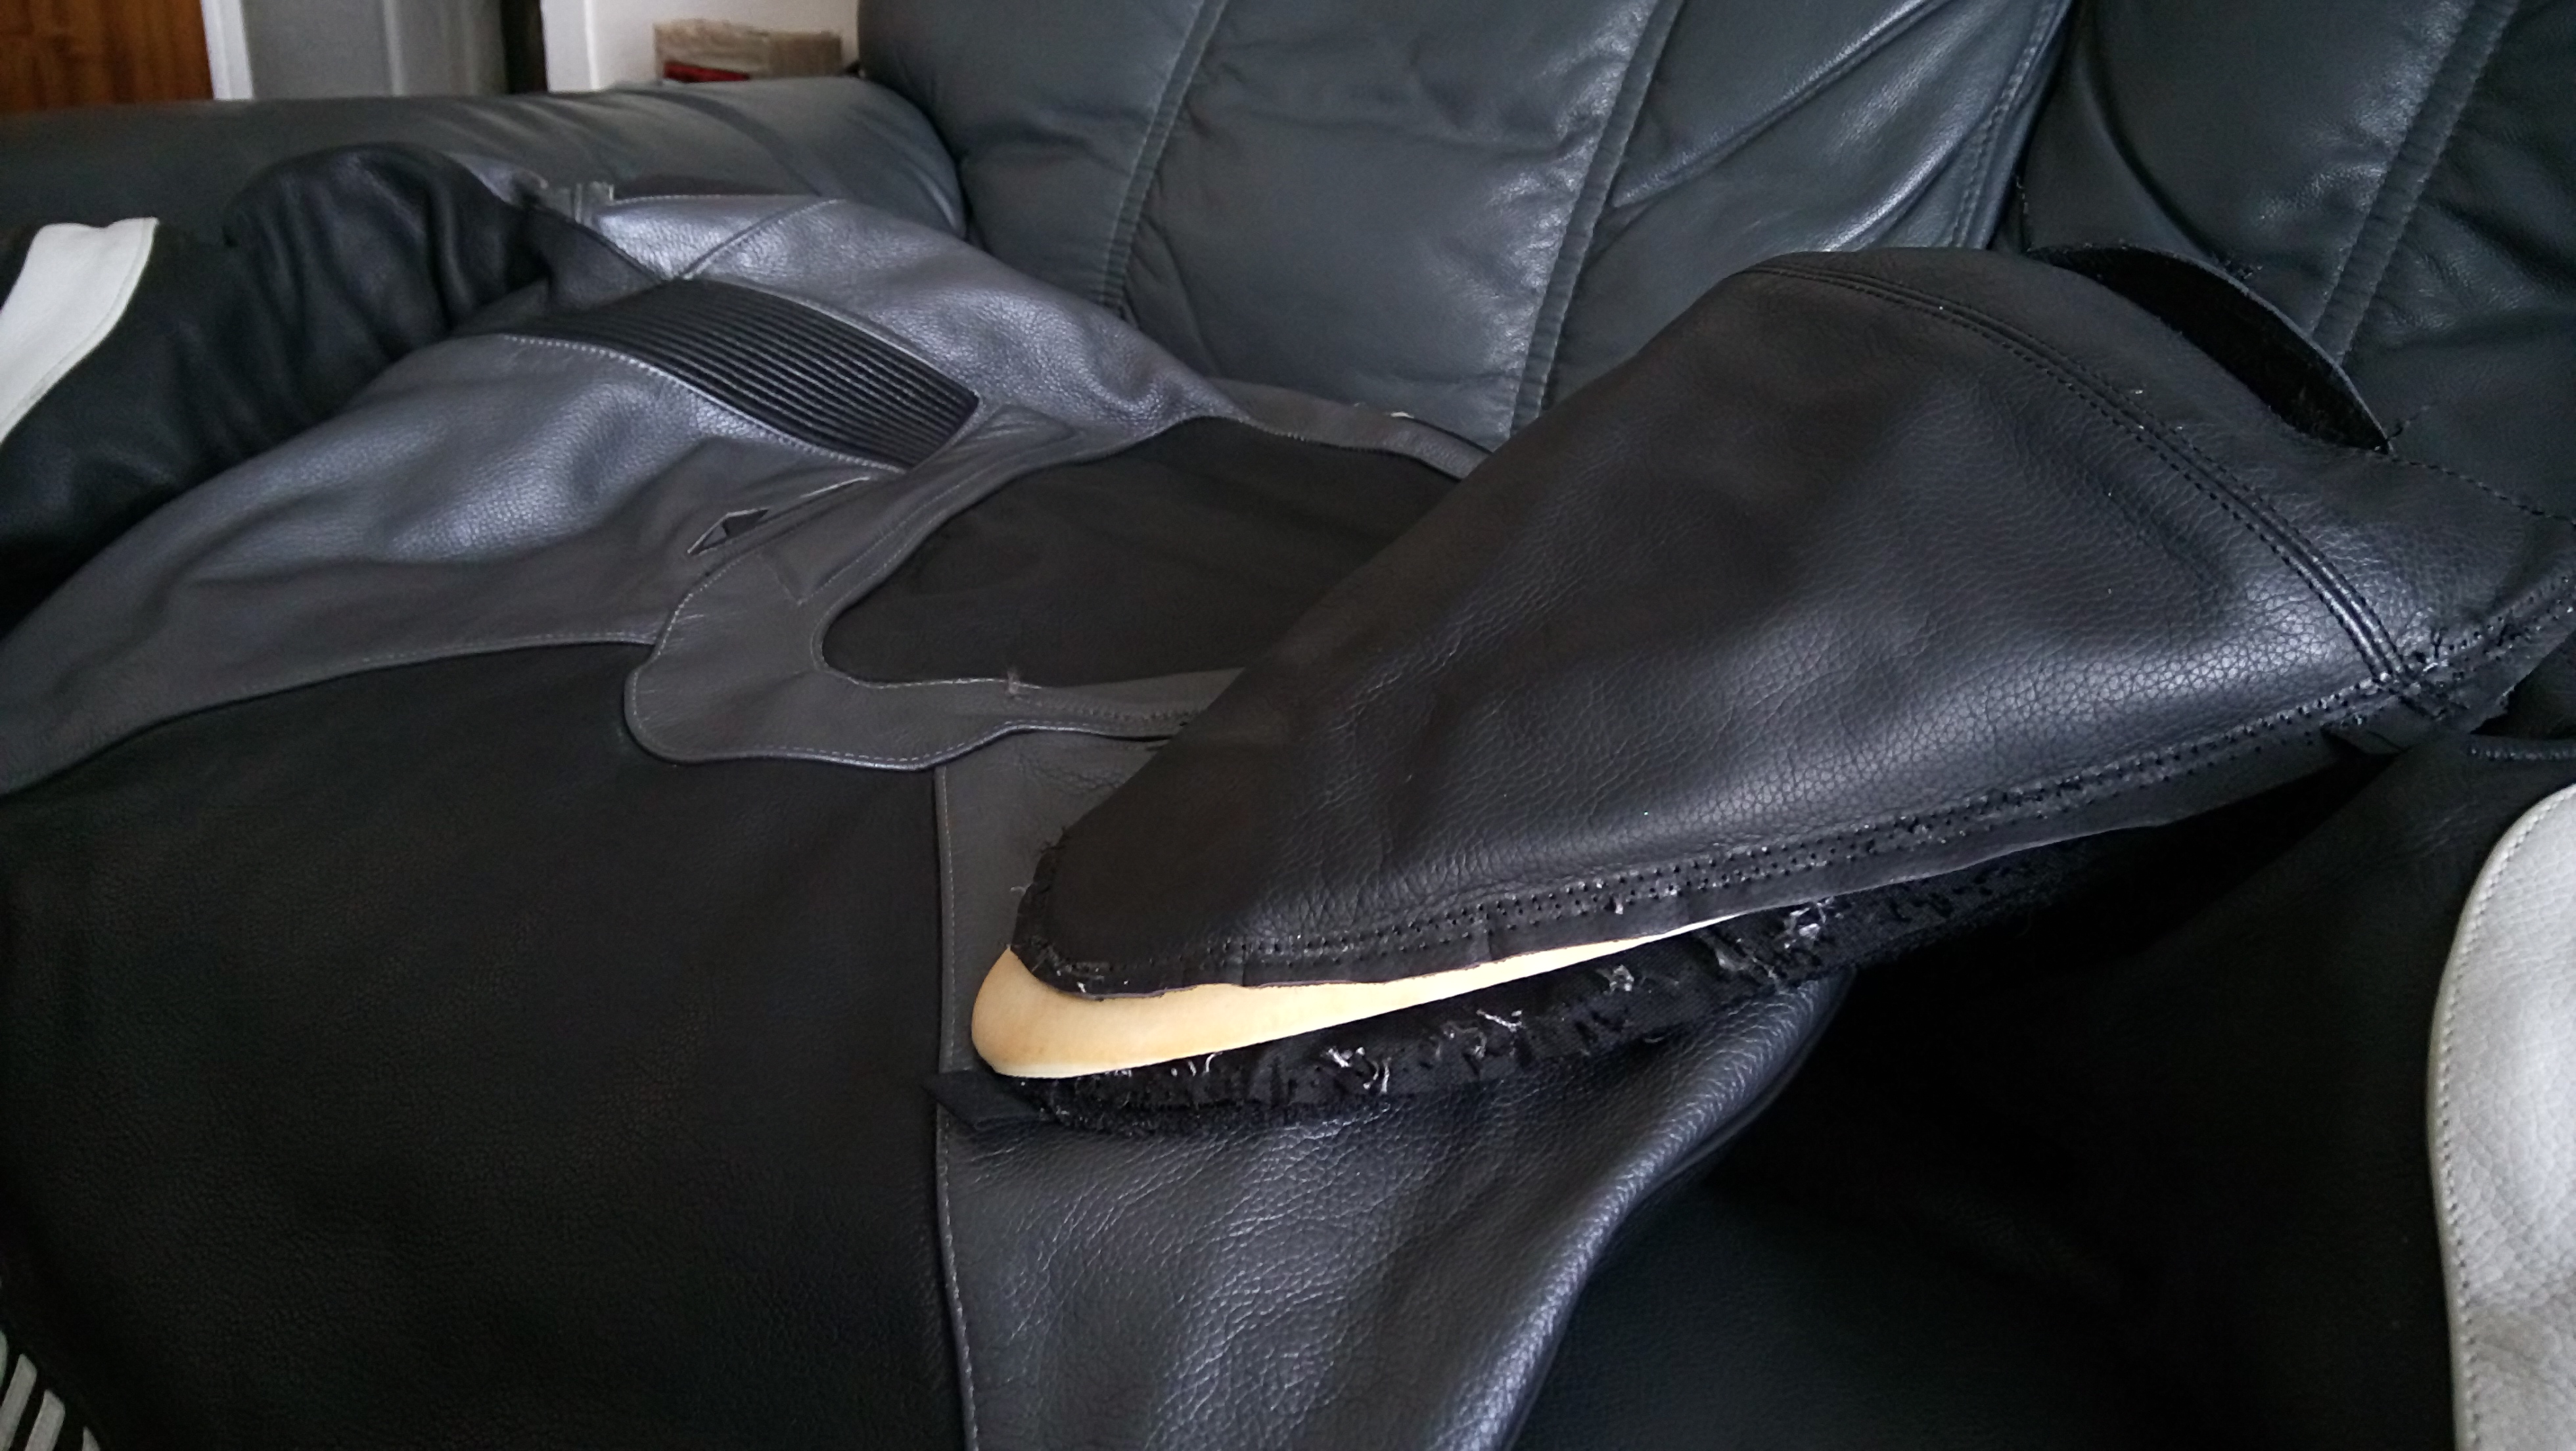 Hump removal from leathers